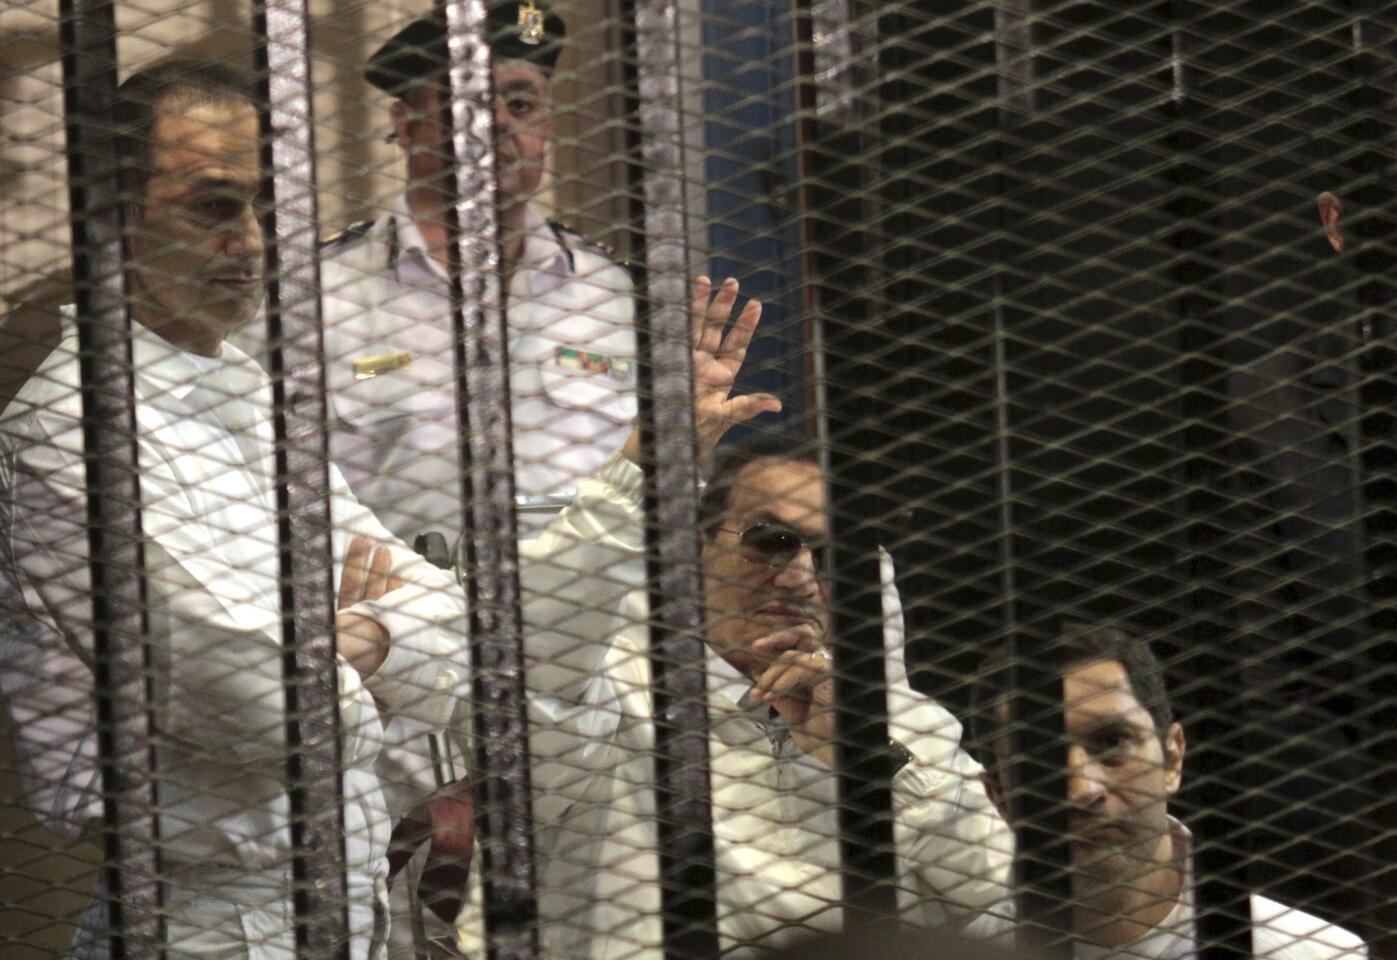 Former Egyptian President Hosni Mubarak, center, waves to supporters in a Cairo courtroom. He and sons Gamal, left, and Alaa attend a hearing in their retrial on appeal.